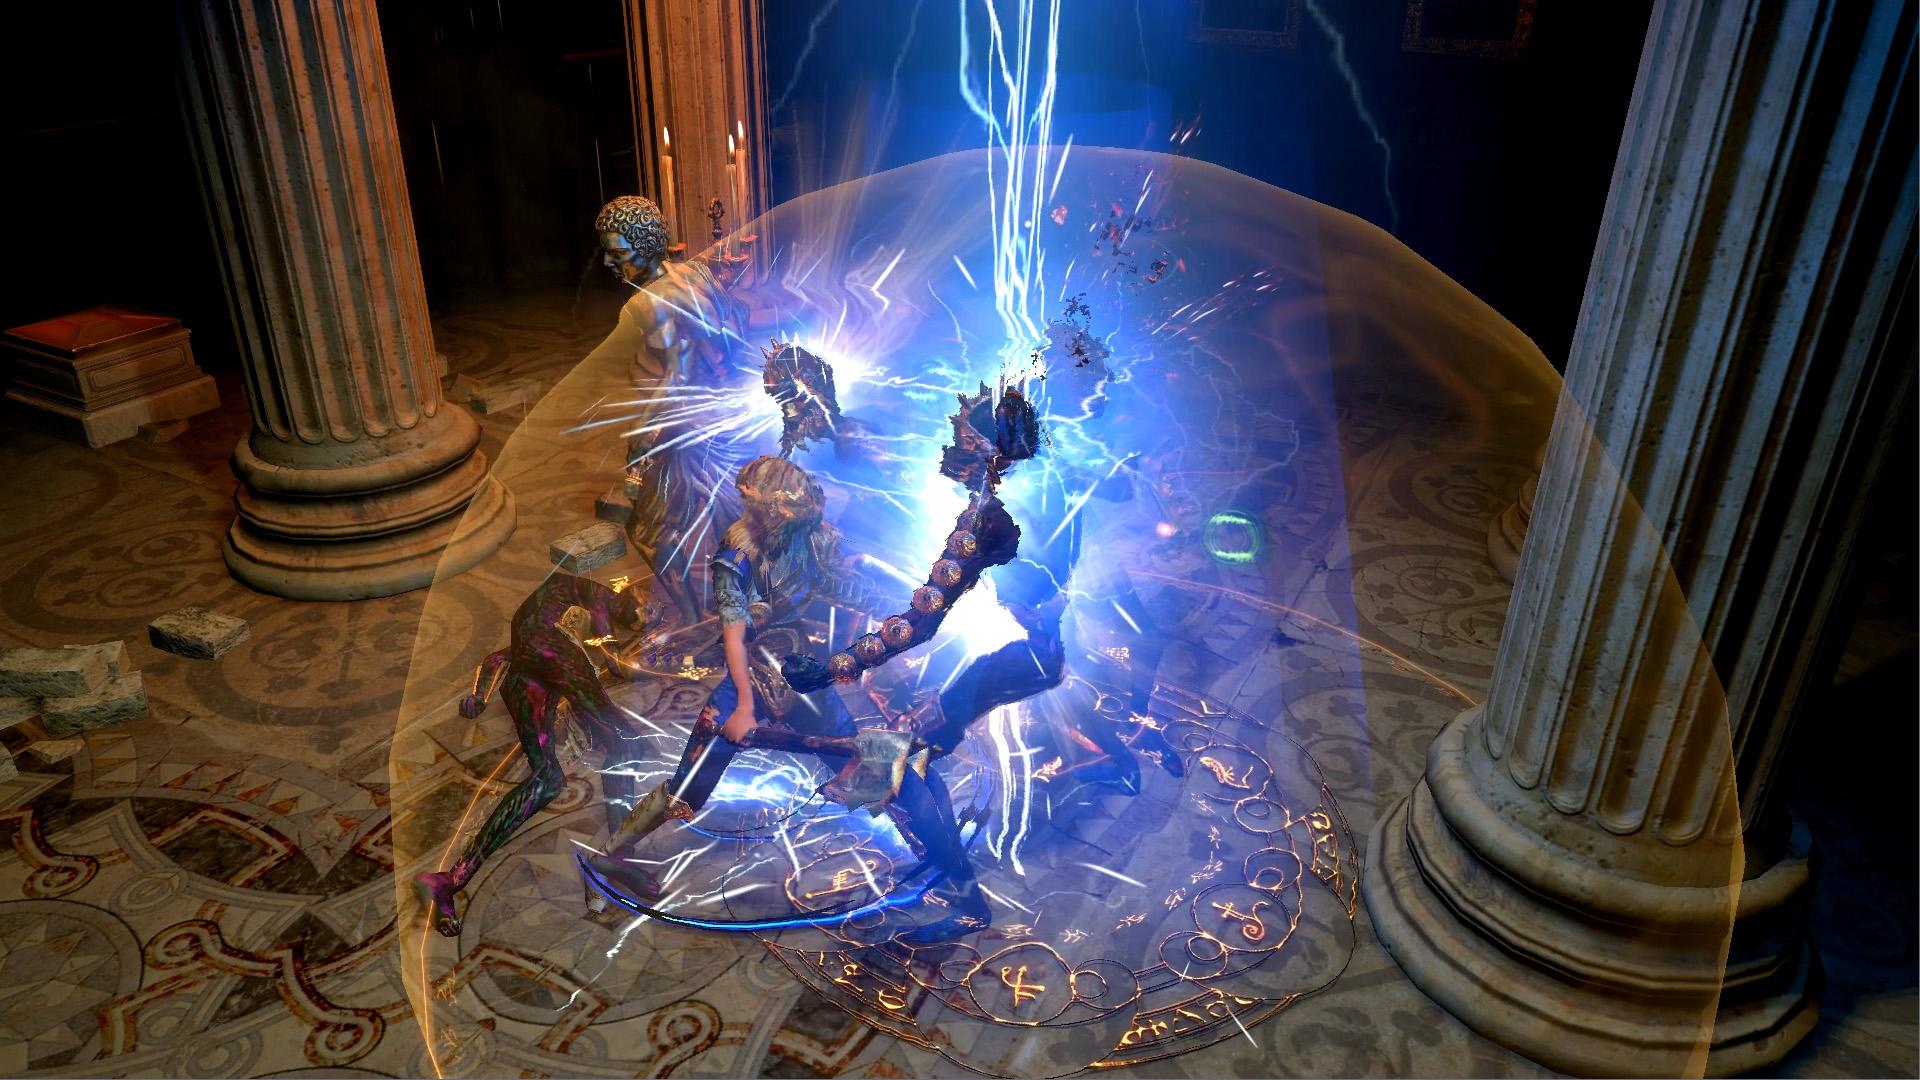 Screenshot №39 from game Path of Exile